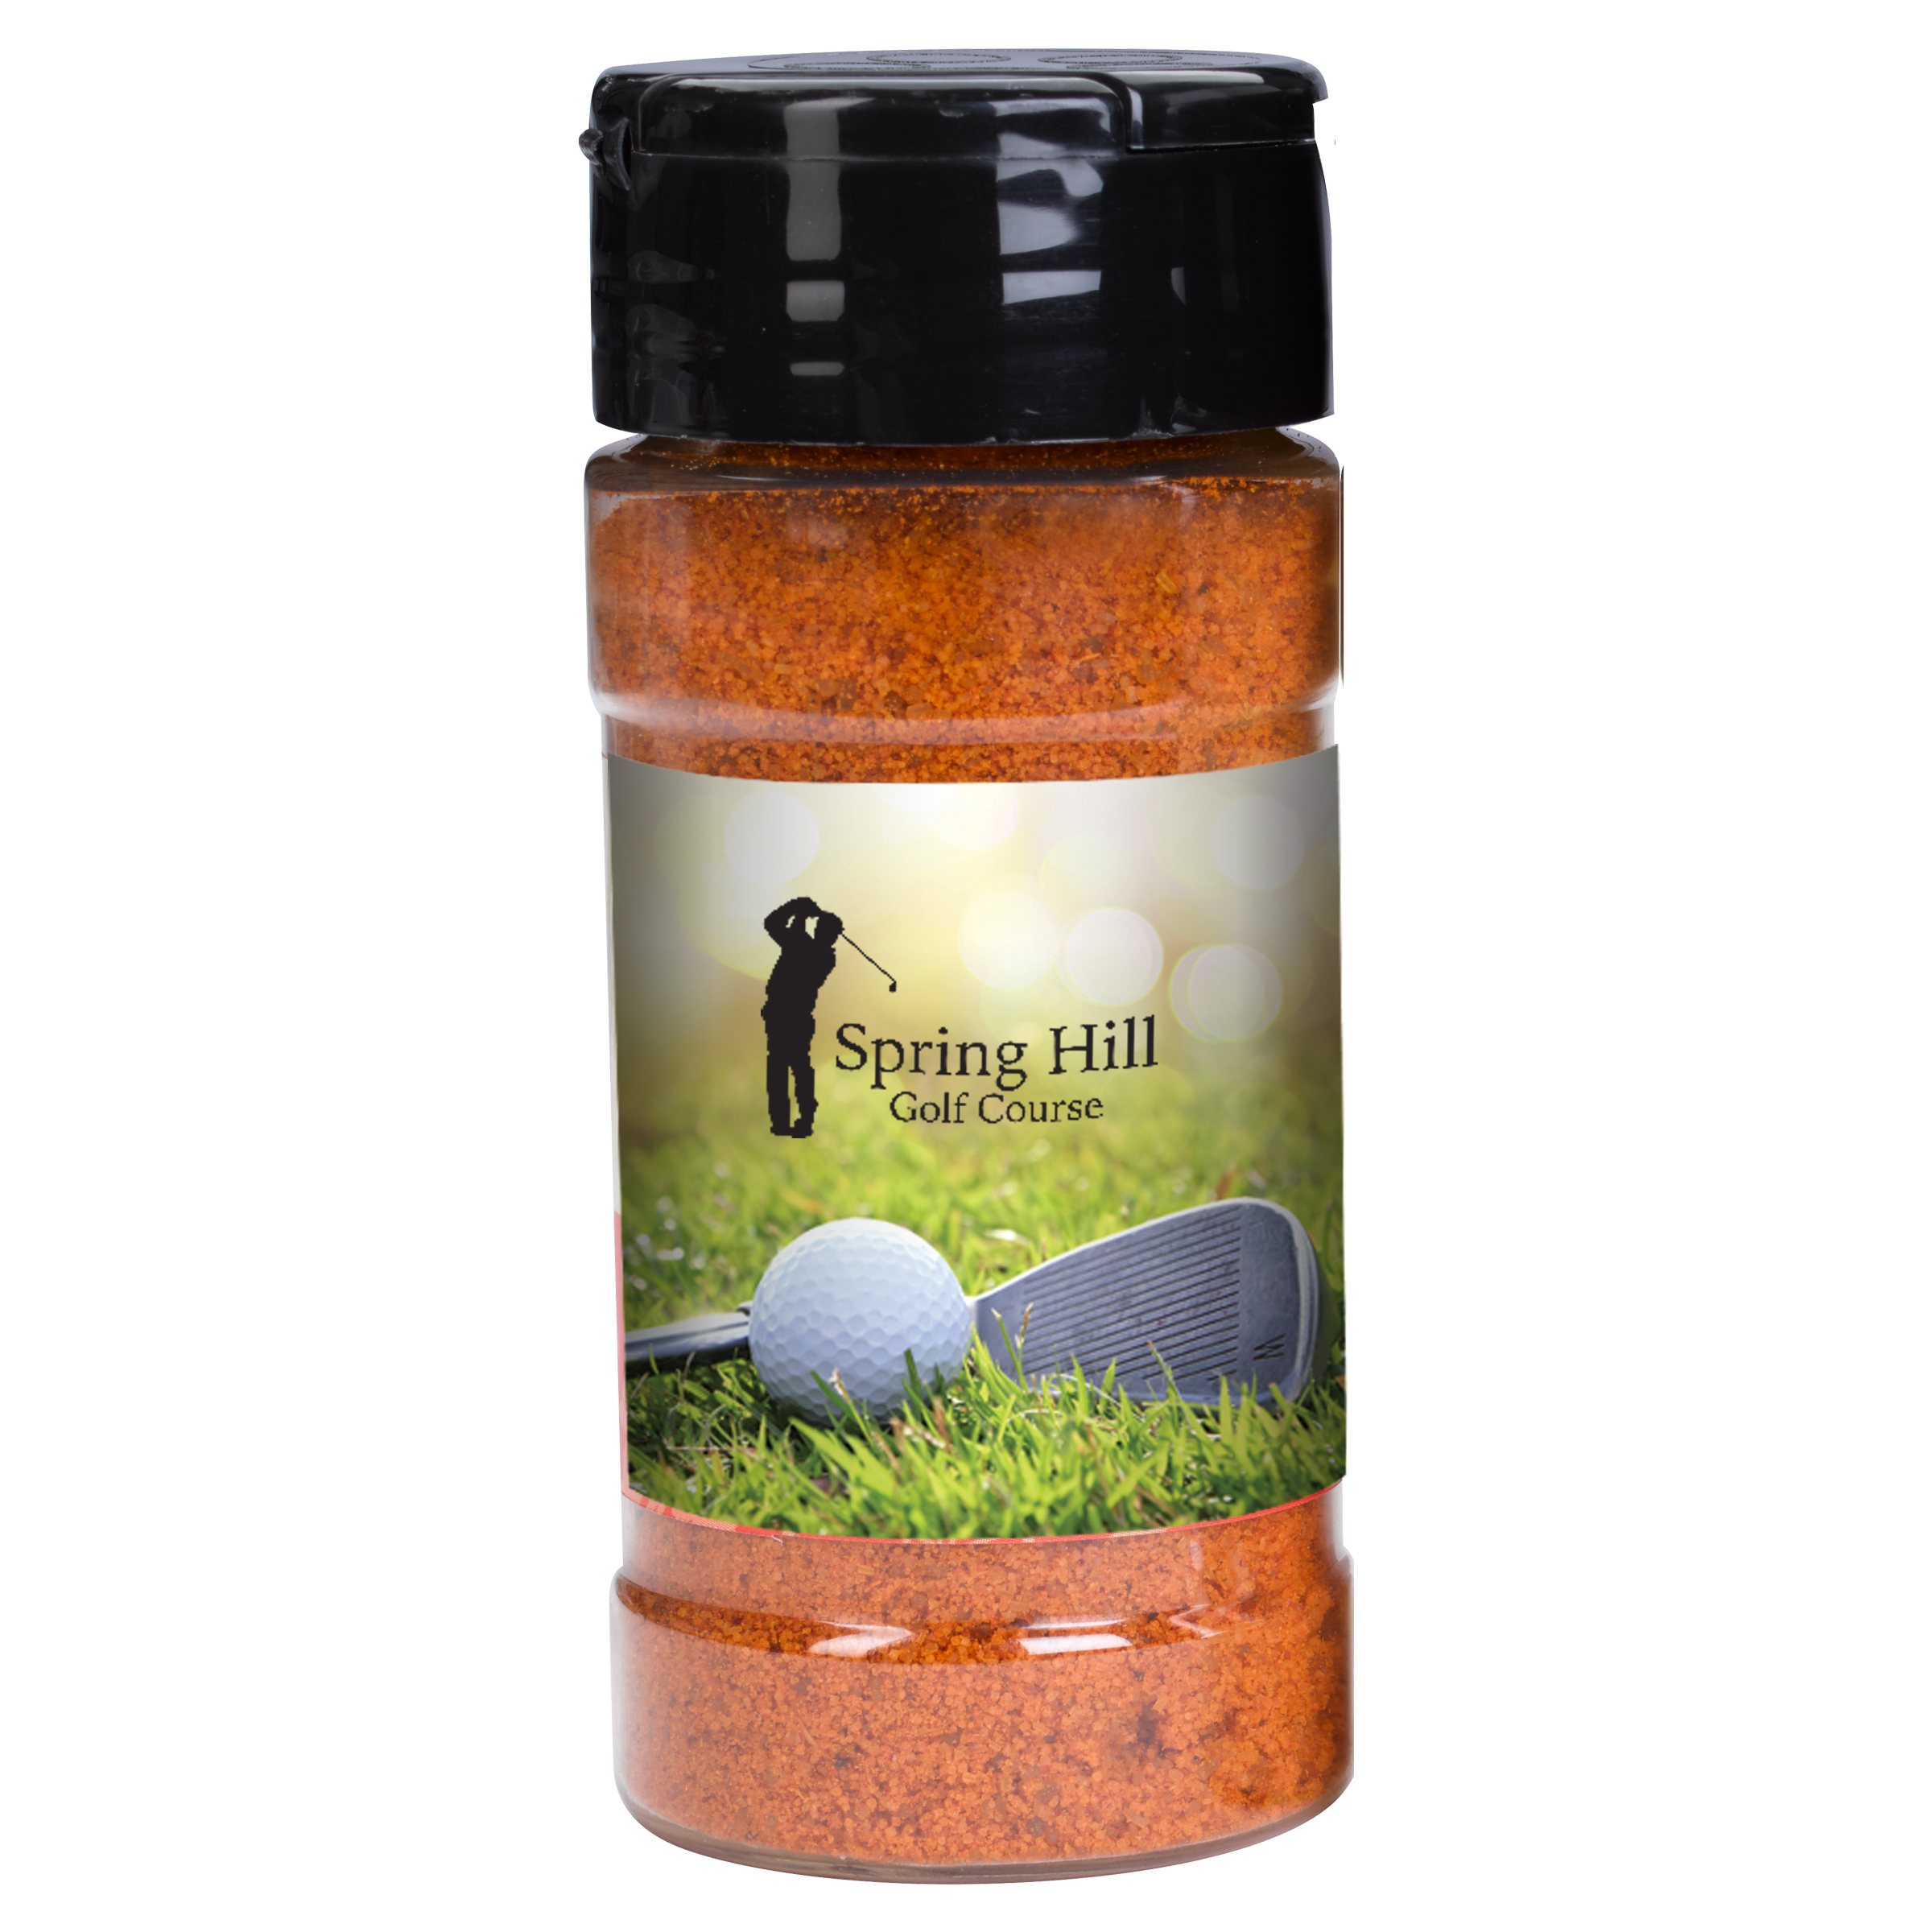 SPICE-SINGLE Gourmet Spice and Rub Bottle Shaker - Hit Promotional